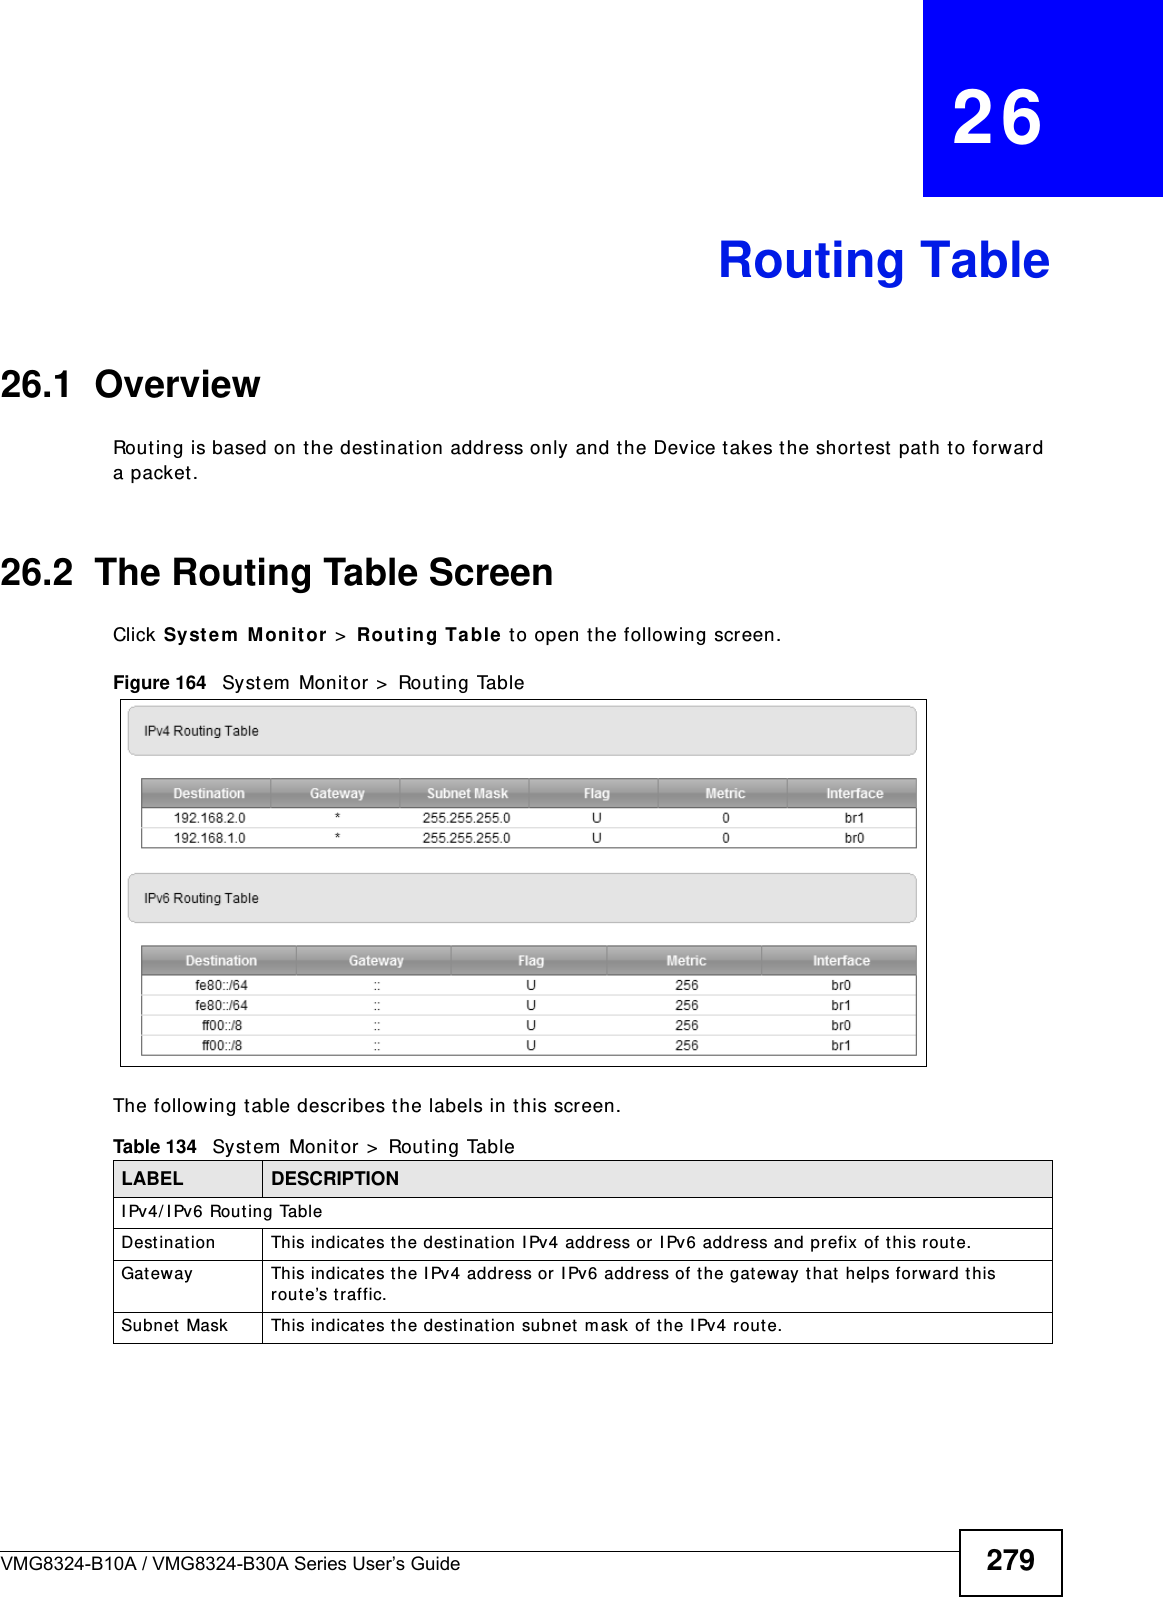 VMG8324-B10A / VMG8324-B30A Series User’s Guide 279CHAPTER   26Routing Table26.1  OverviewRouting is based on the destinat ion address only and the Device t akes the shortest  path to forward a packet .26.2  The Routing Table ScreenClick Syst e m  Monit or &gt;  Rout ing Table t o open t he following screen.Figure 164   Syst em  Monit or &gt;  Routing TableThe following t able describes the labels in t his screen.Table 134   Sy st em  Monit or &gt;  Rout ing TableLABEL DESCRIPTIONI Pv4/ I Pv6 Rout ing TableDest inat ion This indicates the dest inat ion I Pv4 address or I Pv6 address and prefix of this rout e.Gateway This indicat es the I Pv 4 address or I Pv6 addr ess of the gateway t hat  helps forward t his rout e’s t raffic.Subnet  Mask This indicat es t he dest ination subnet m ask  of t he I Pv4 rout e.